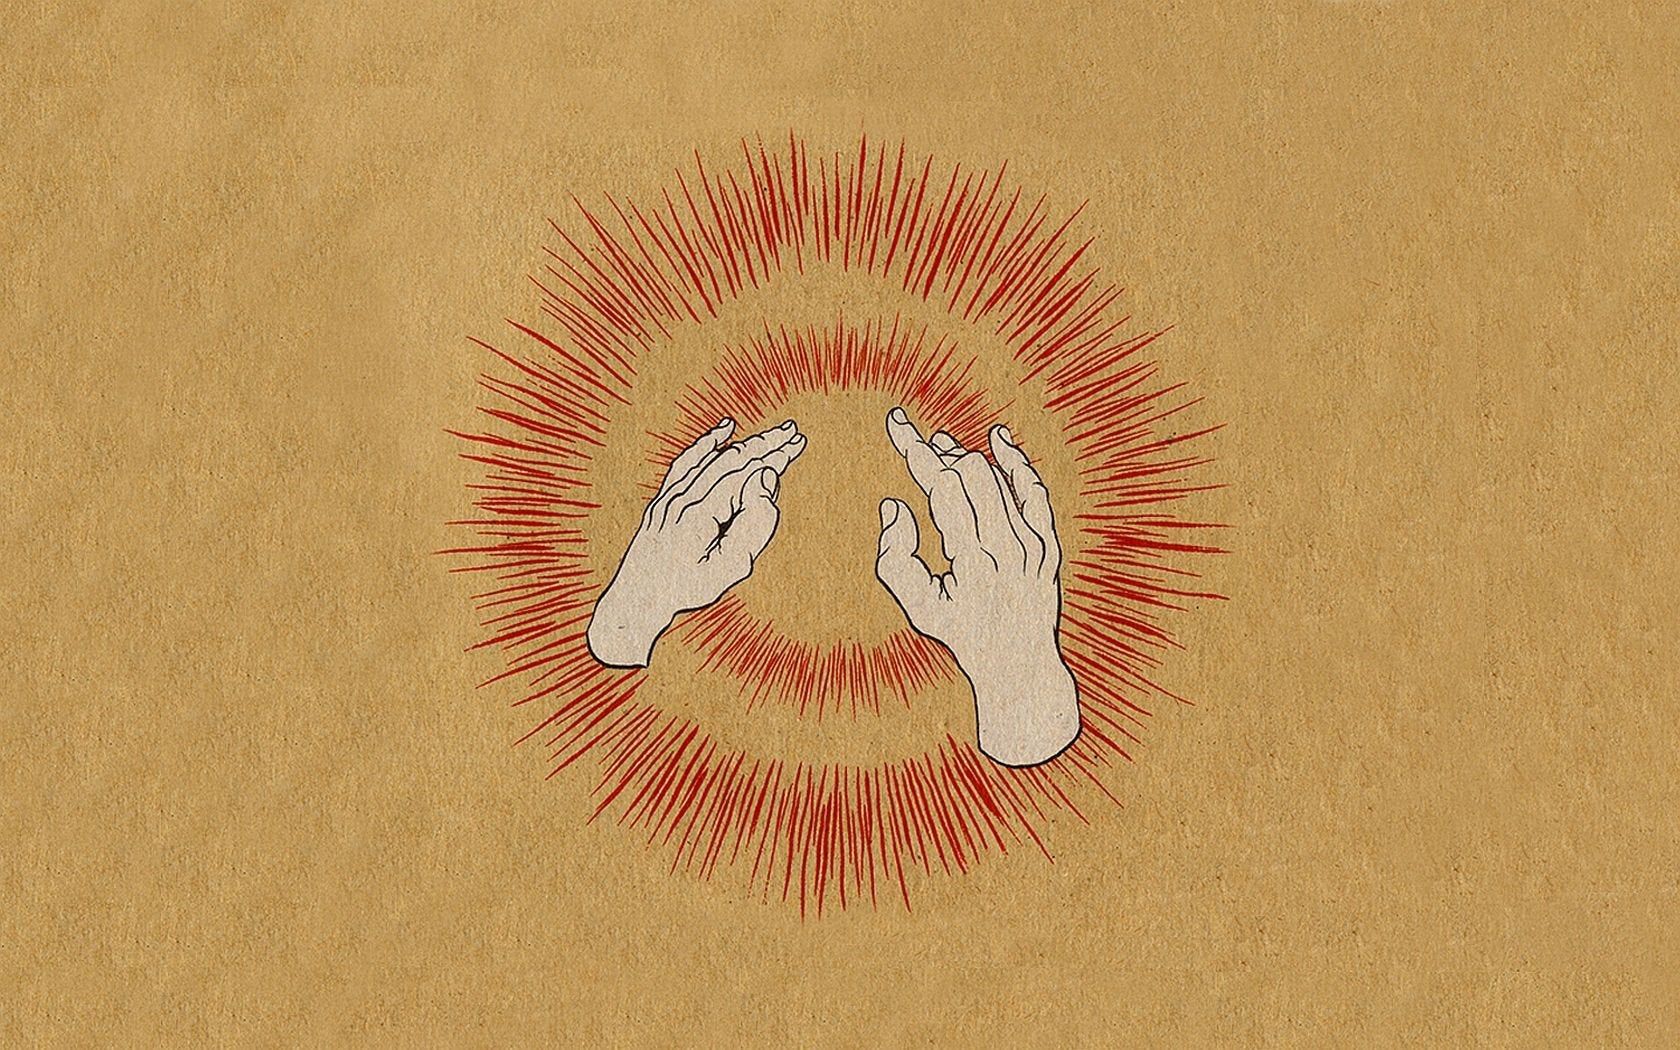 Lift Your Skinny Fists Like Antennas to Heaven by Godspeed You! Black Emperor album cover